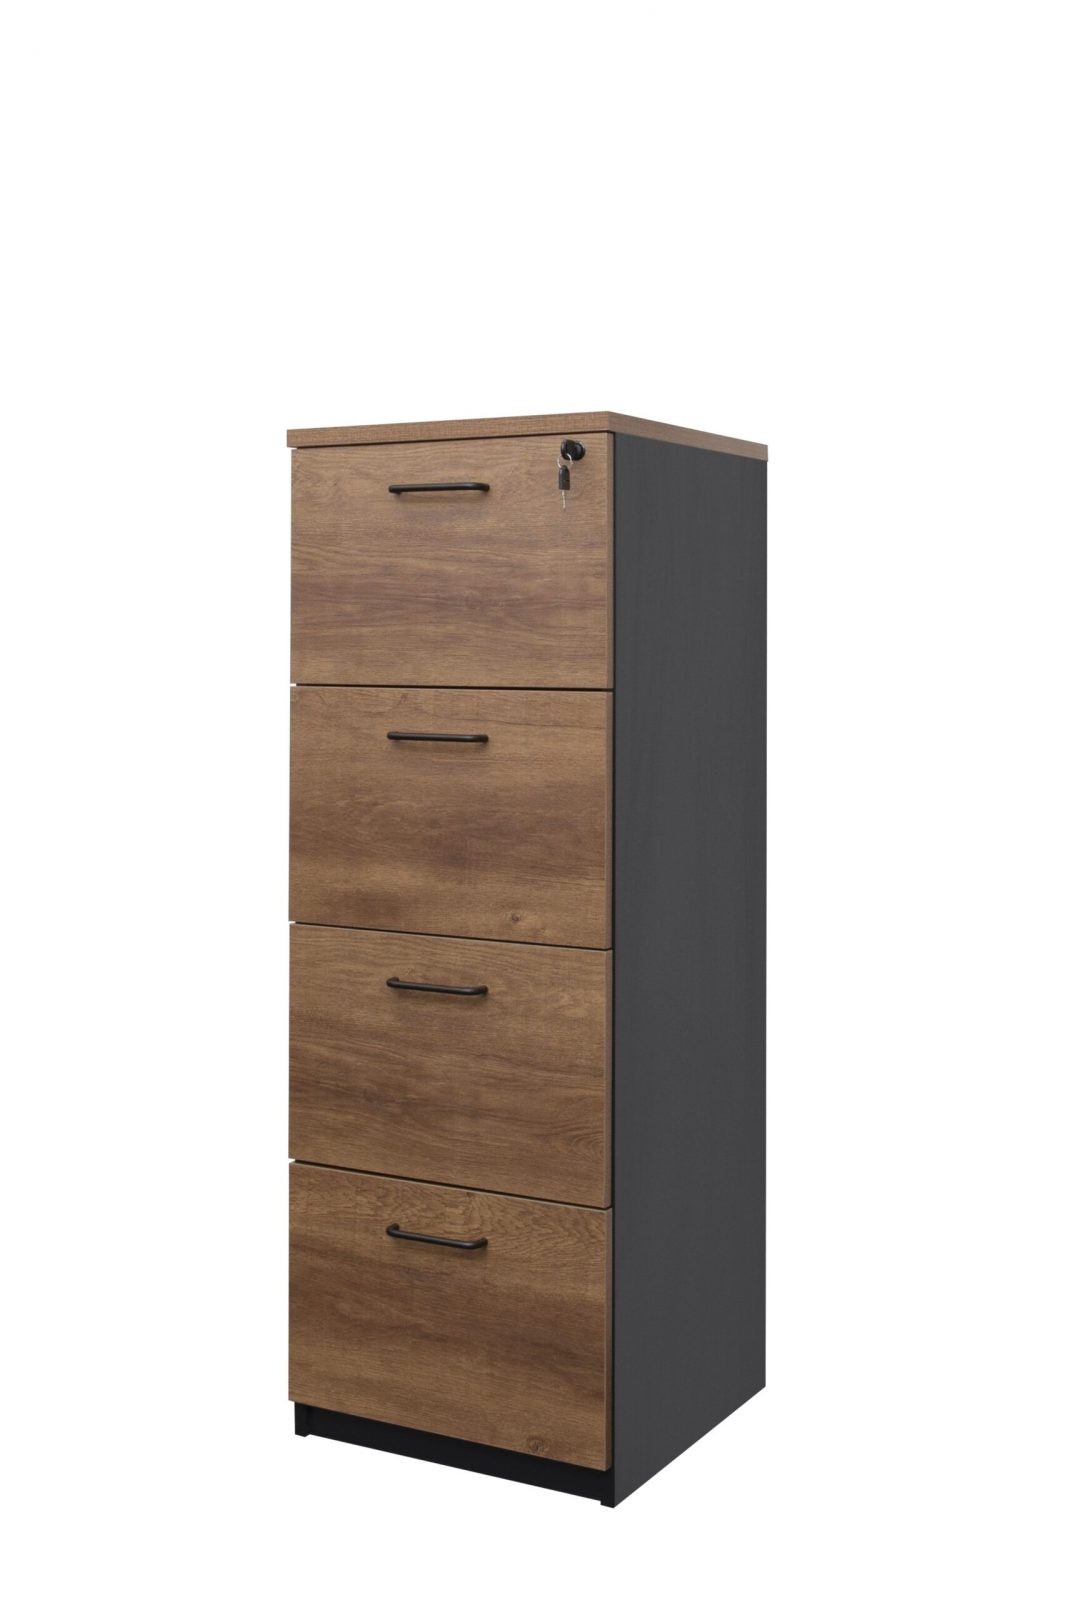 GP Regal System Commercial Office 4 Drawer Filing Cabinet